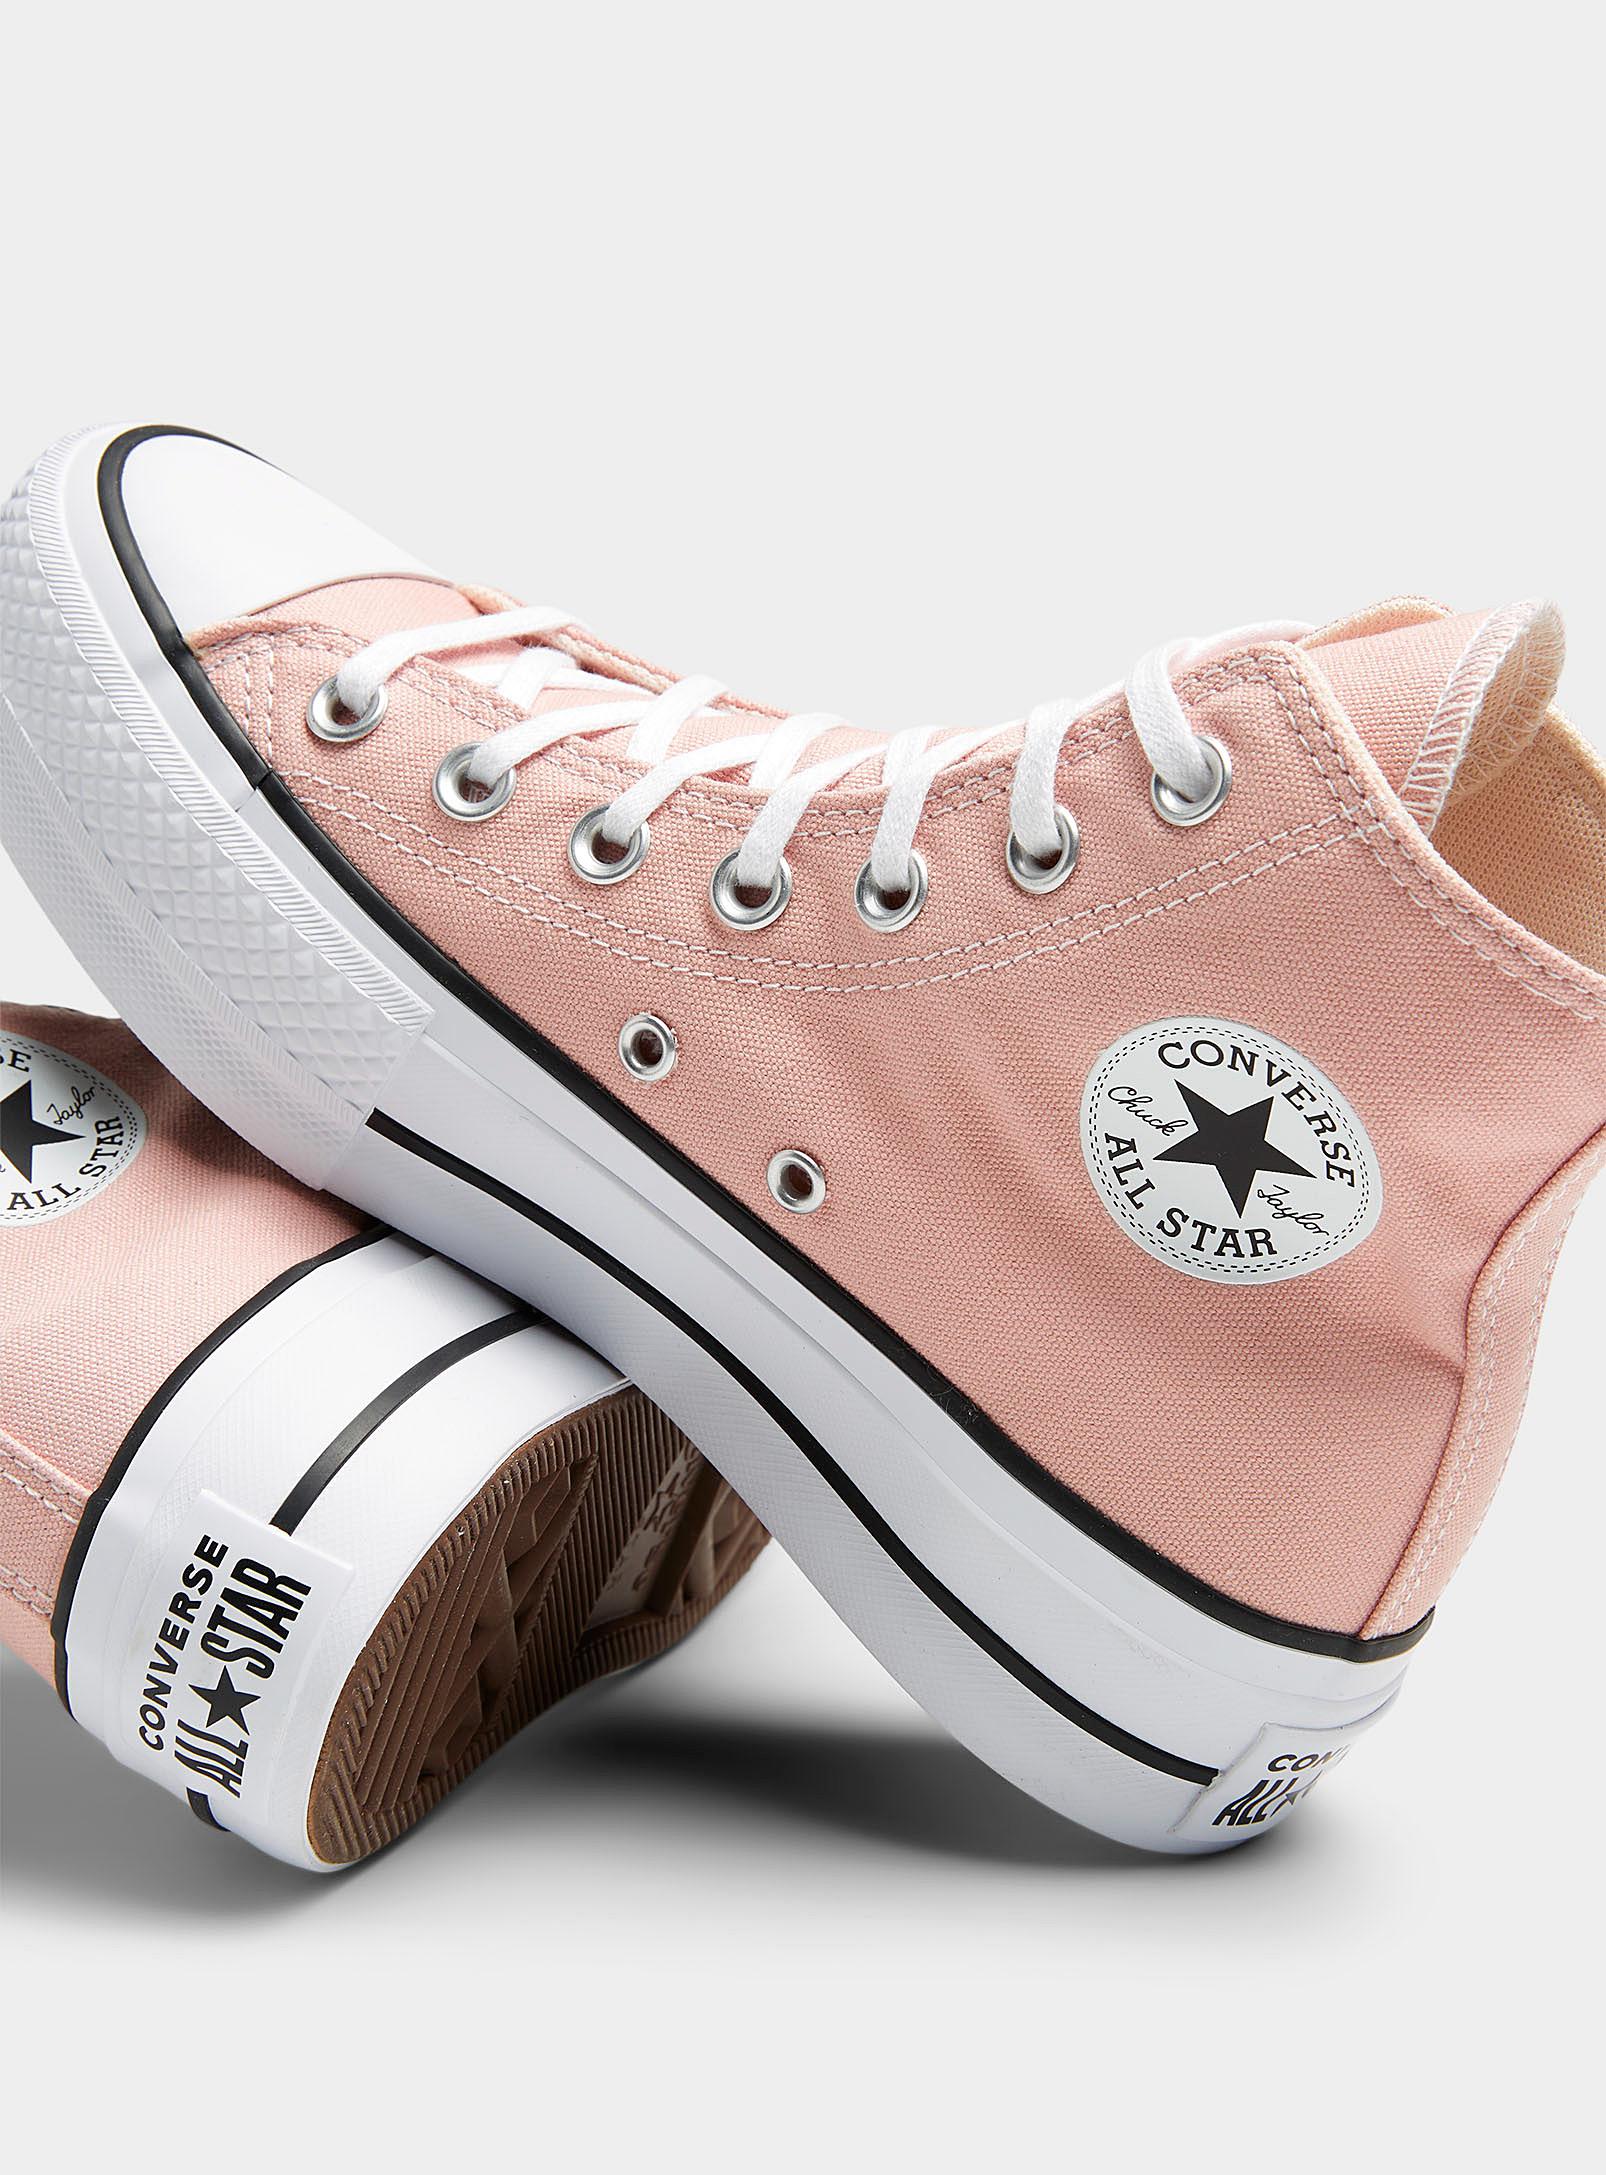 Converse Chuck Taylor All High Top Pink Clay Platform Sneakers | Lyst